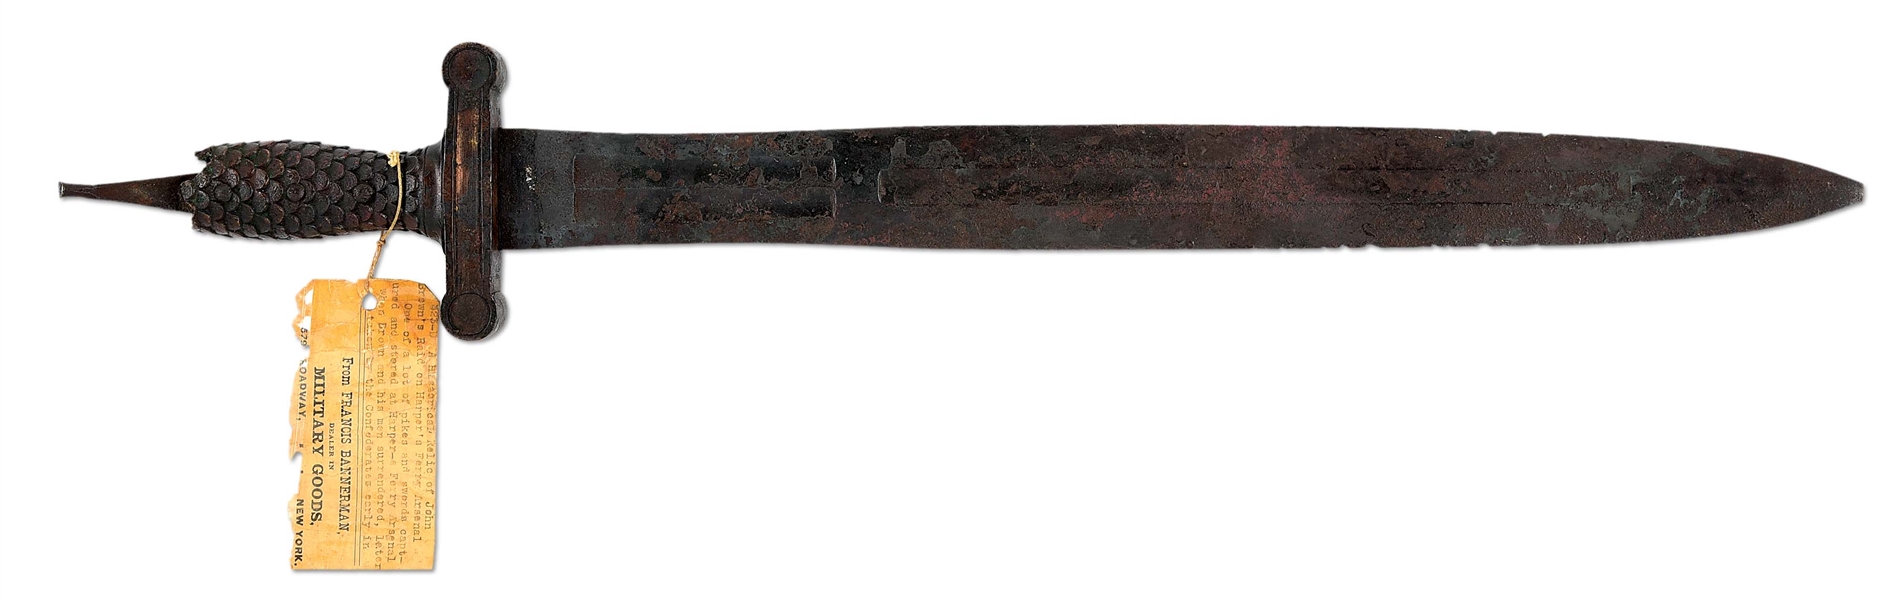 AMES MODEL 1832 SHORT ARTILLERY SWORD ATTRIBUTED TO JOHN BROWN’S RAID ON HARPERS FERRY.